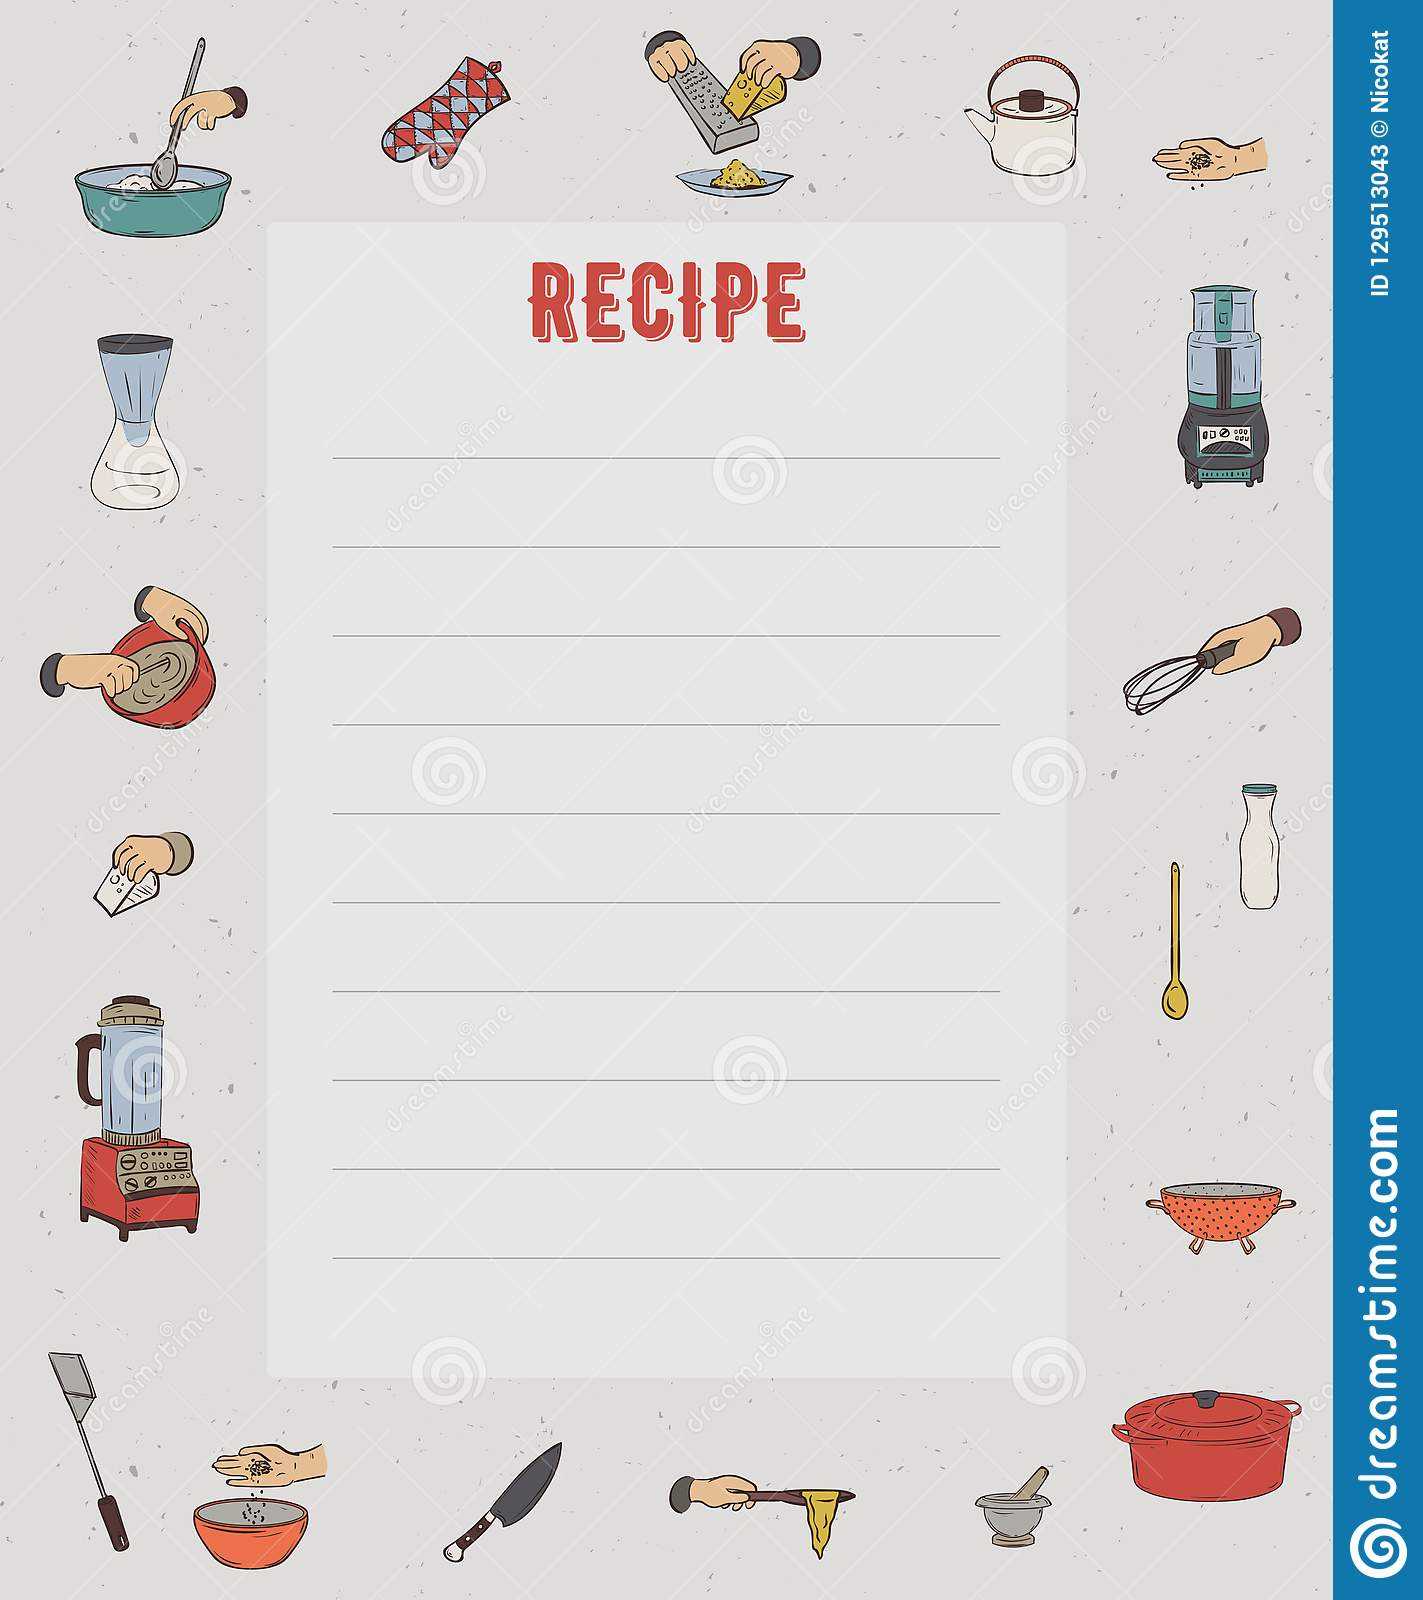 Recipe Card. Cookbook Page. Design Template With Kitchen Within Restaurant Recipe Card Template